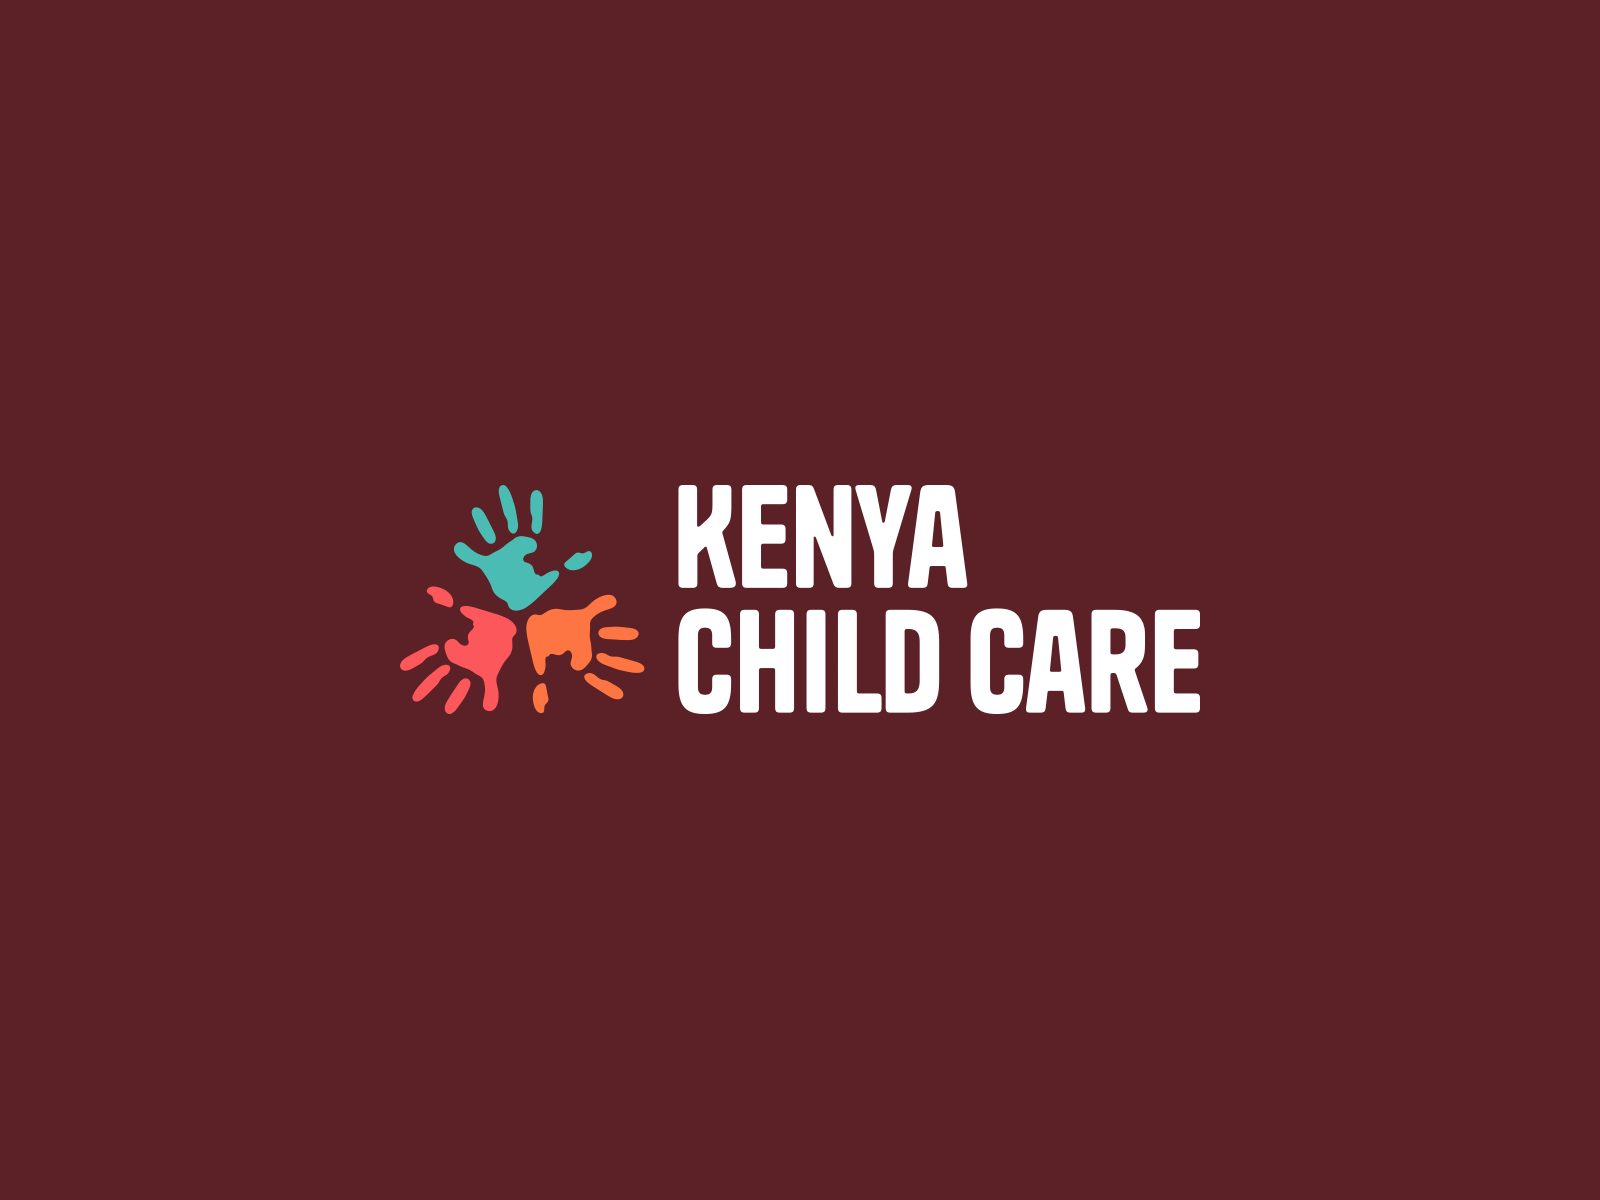 A colorful, professional brand identity for Kenya Child Care